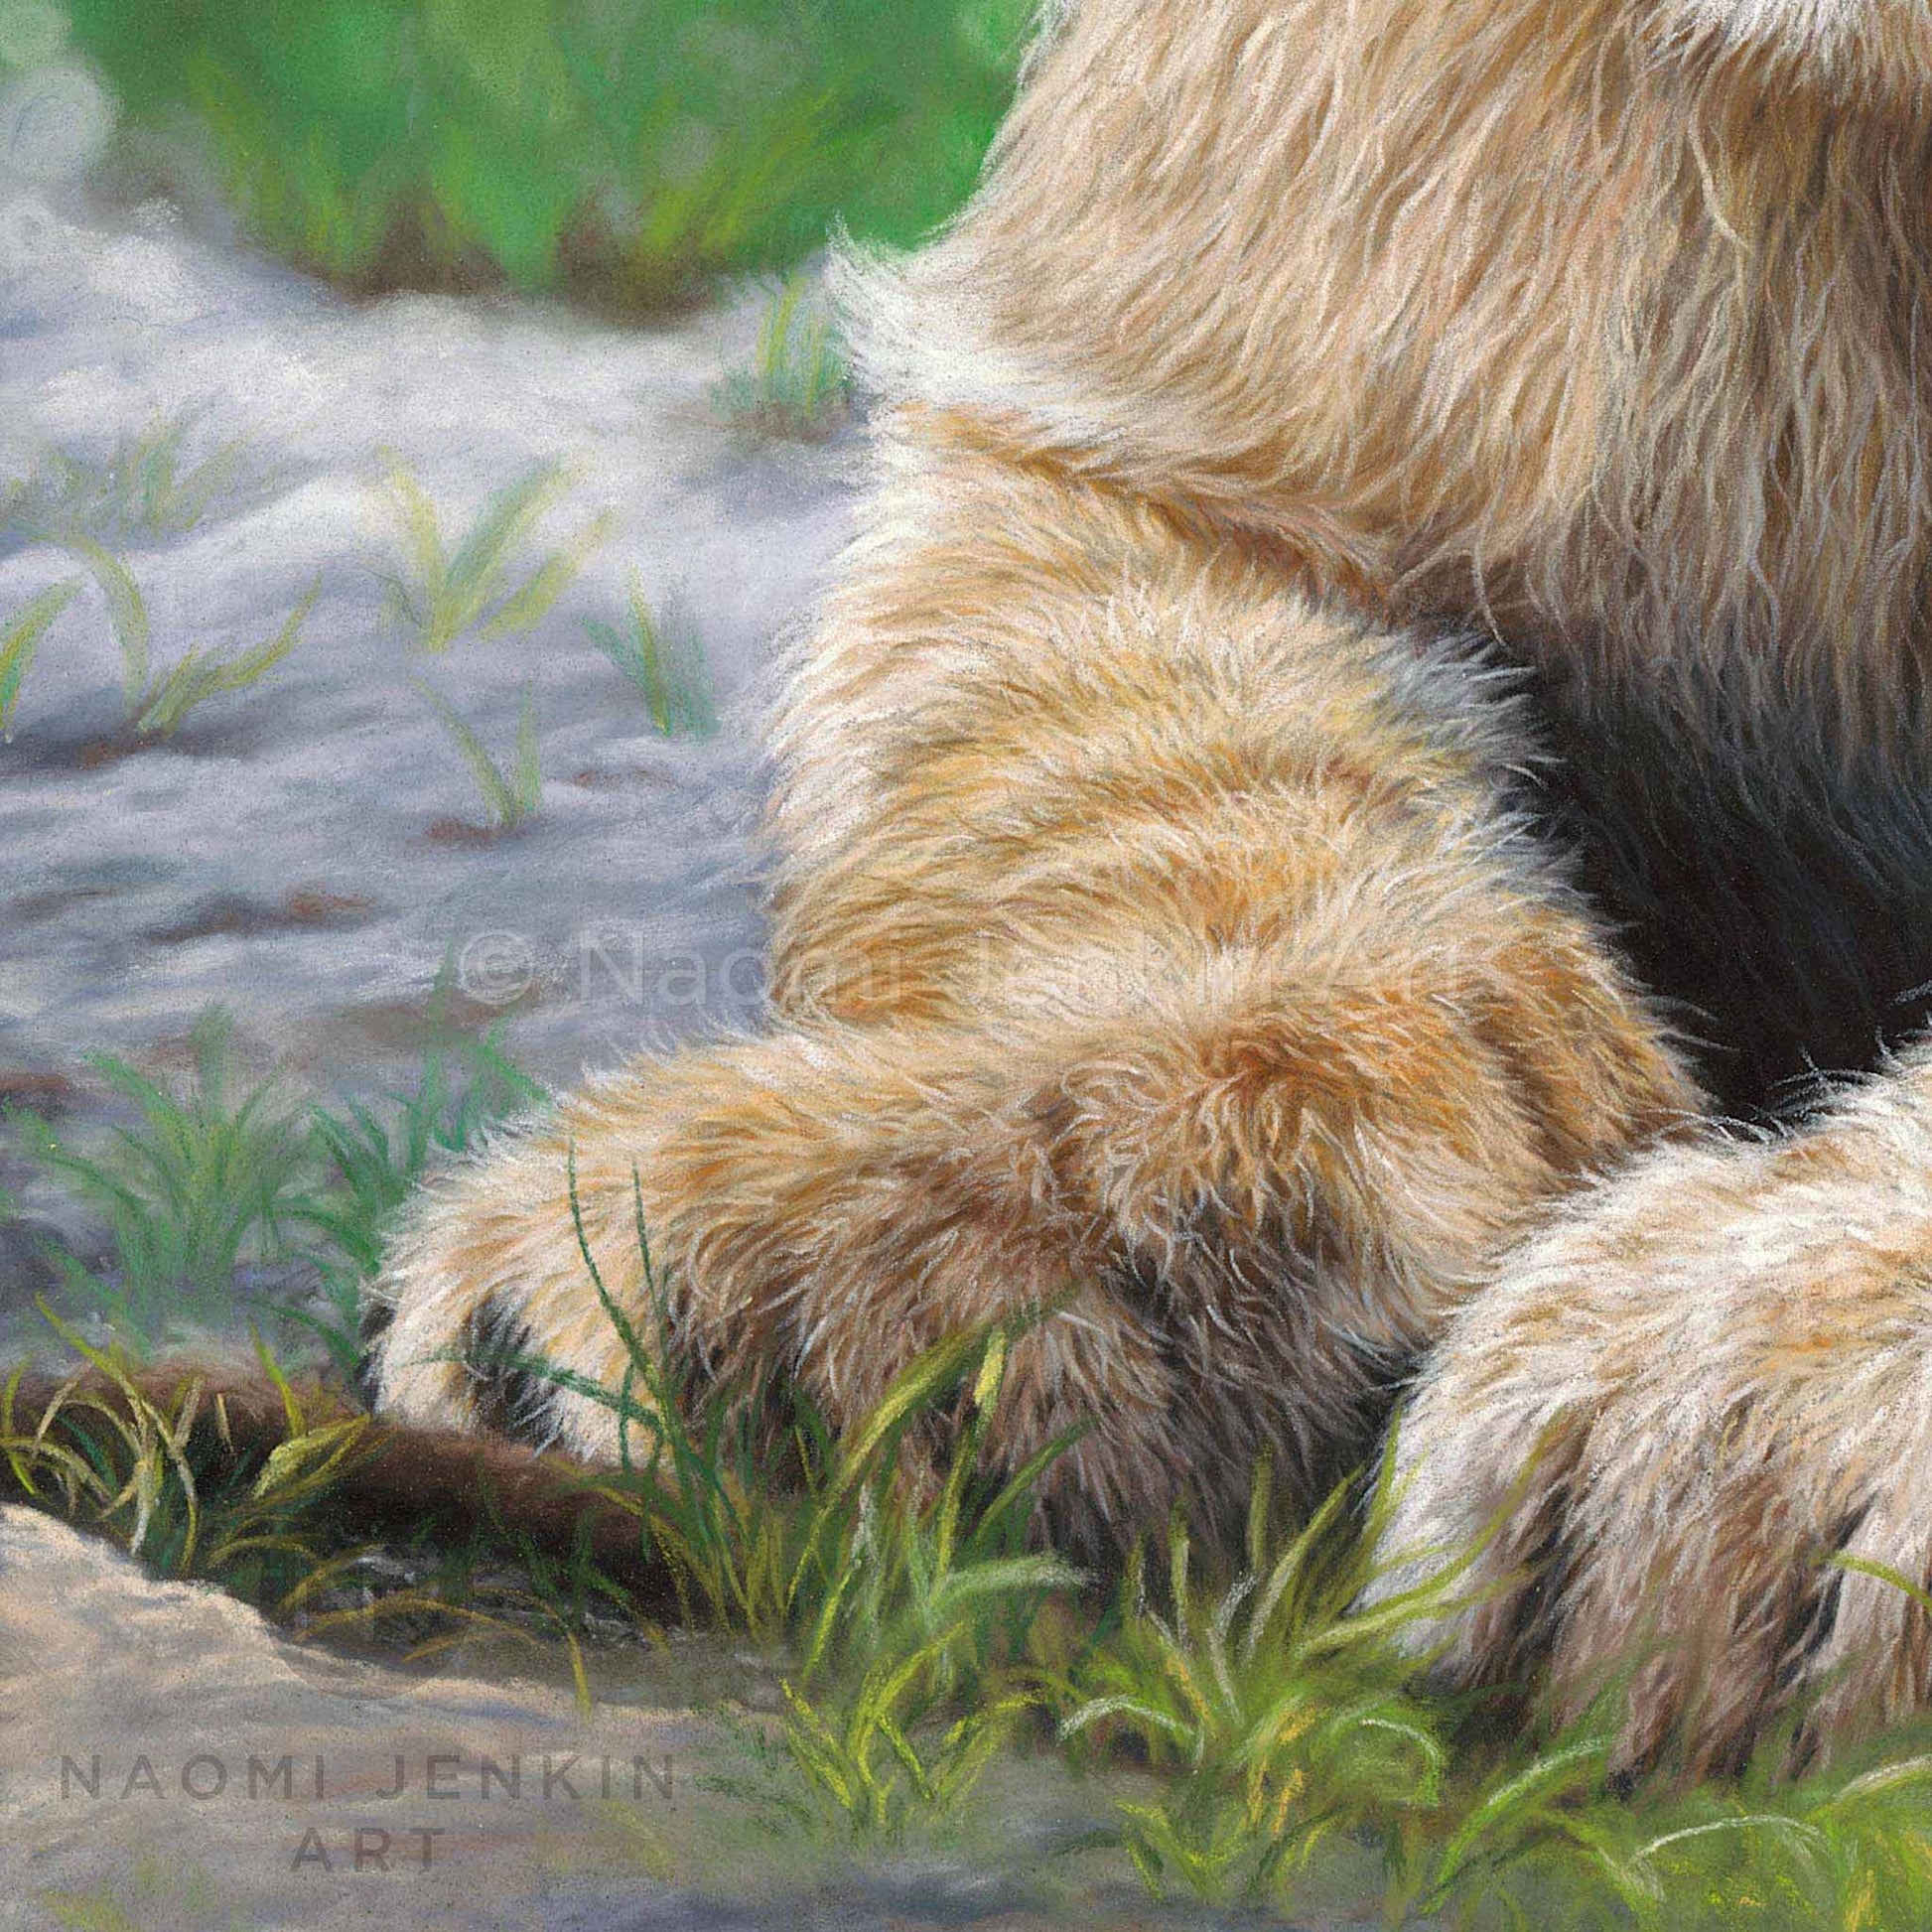 Close up lion foot drawing from the original painting 'Lyin Around' by Naomi Jenkin